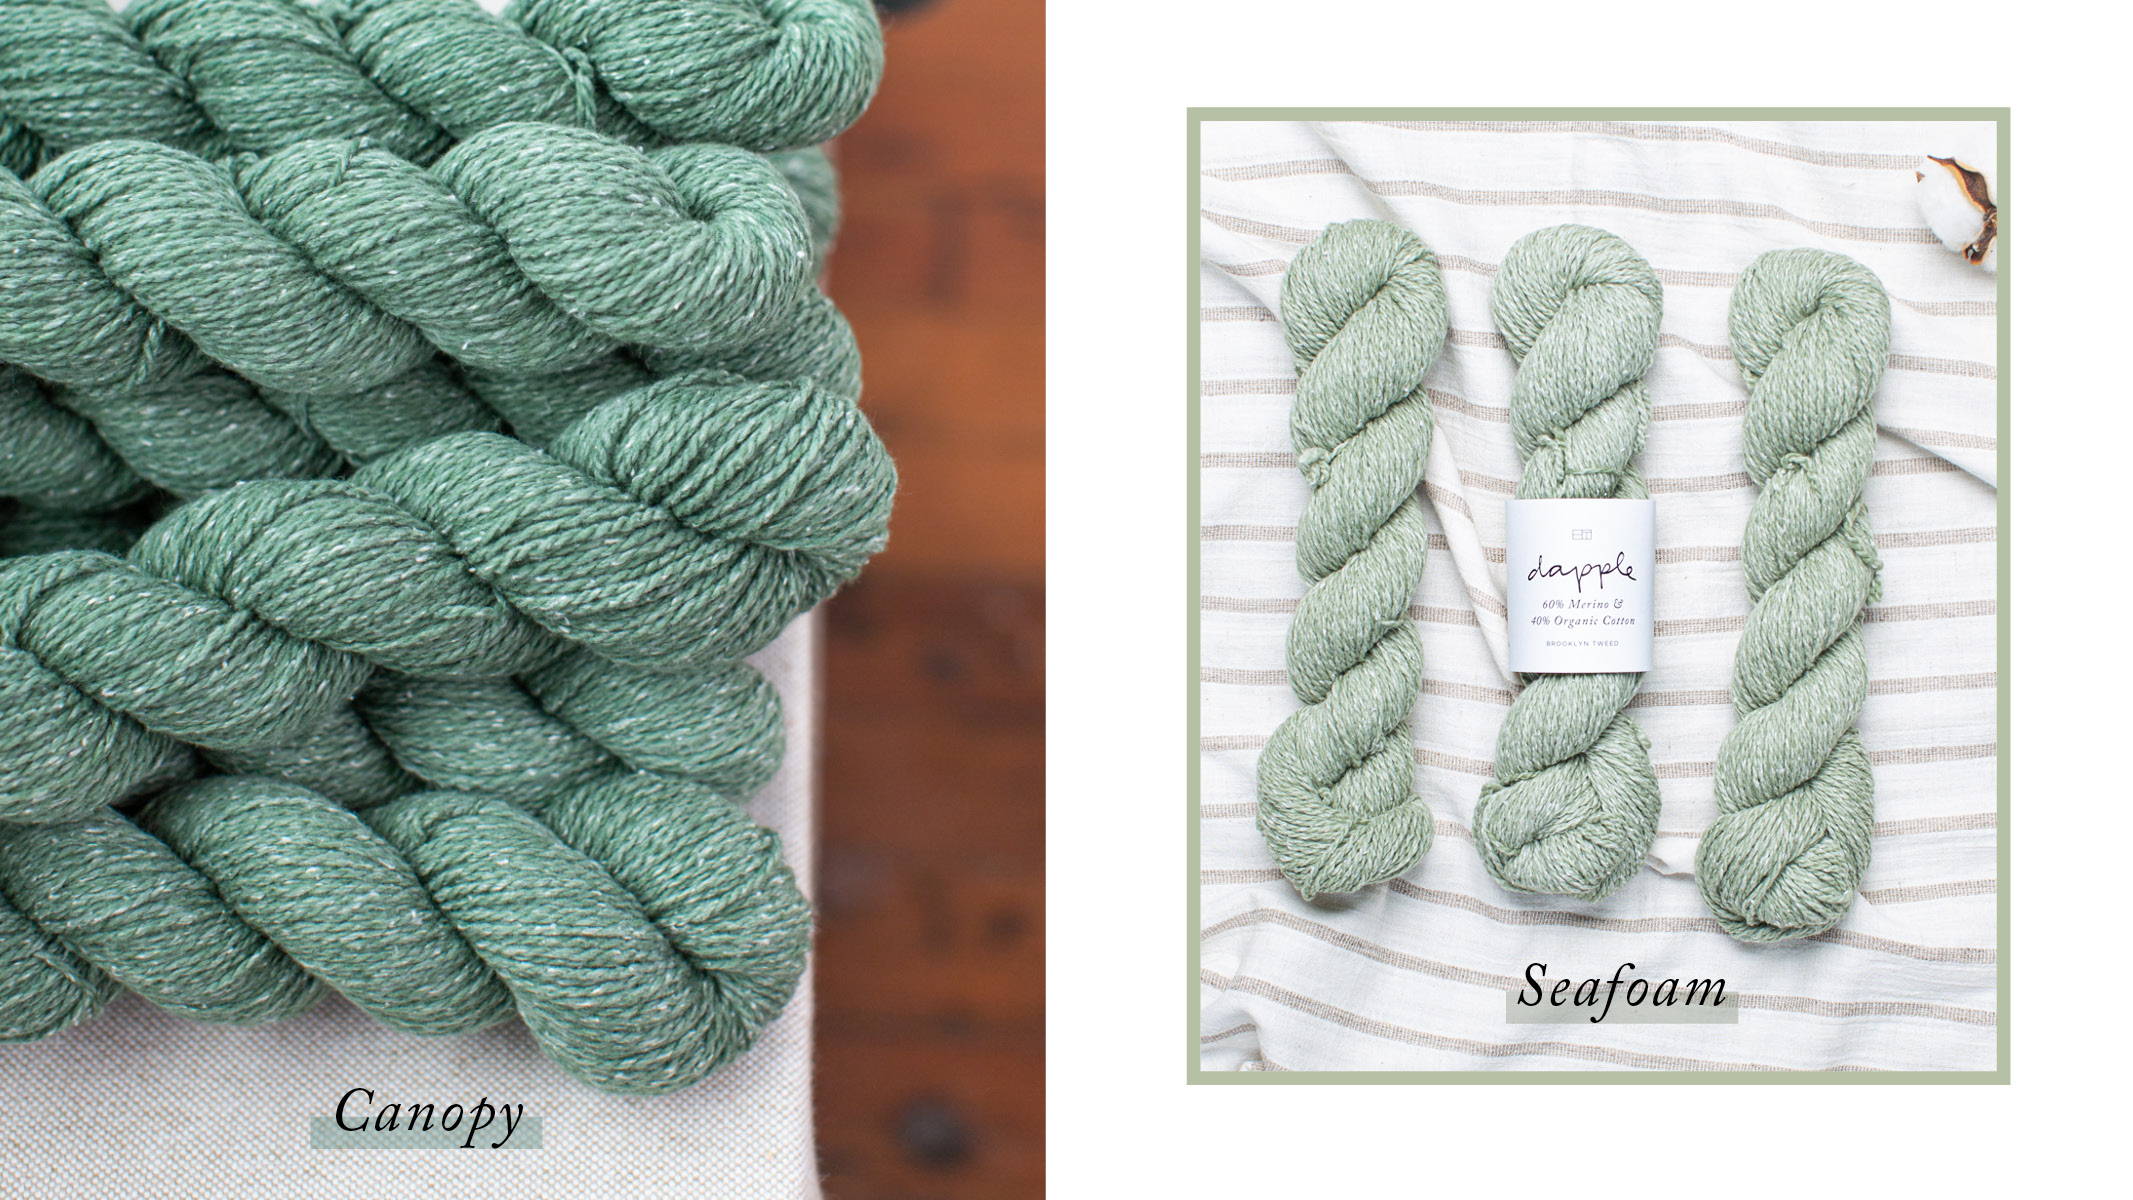 Right: three skeins of Dapple Seafoam in a neat row with the middle skein labeled on a white and beige striped linen fabric. Left: a large pile of Dapple Canopy skeins on a table.